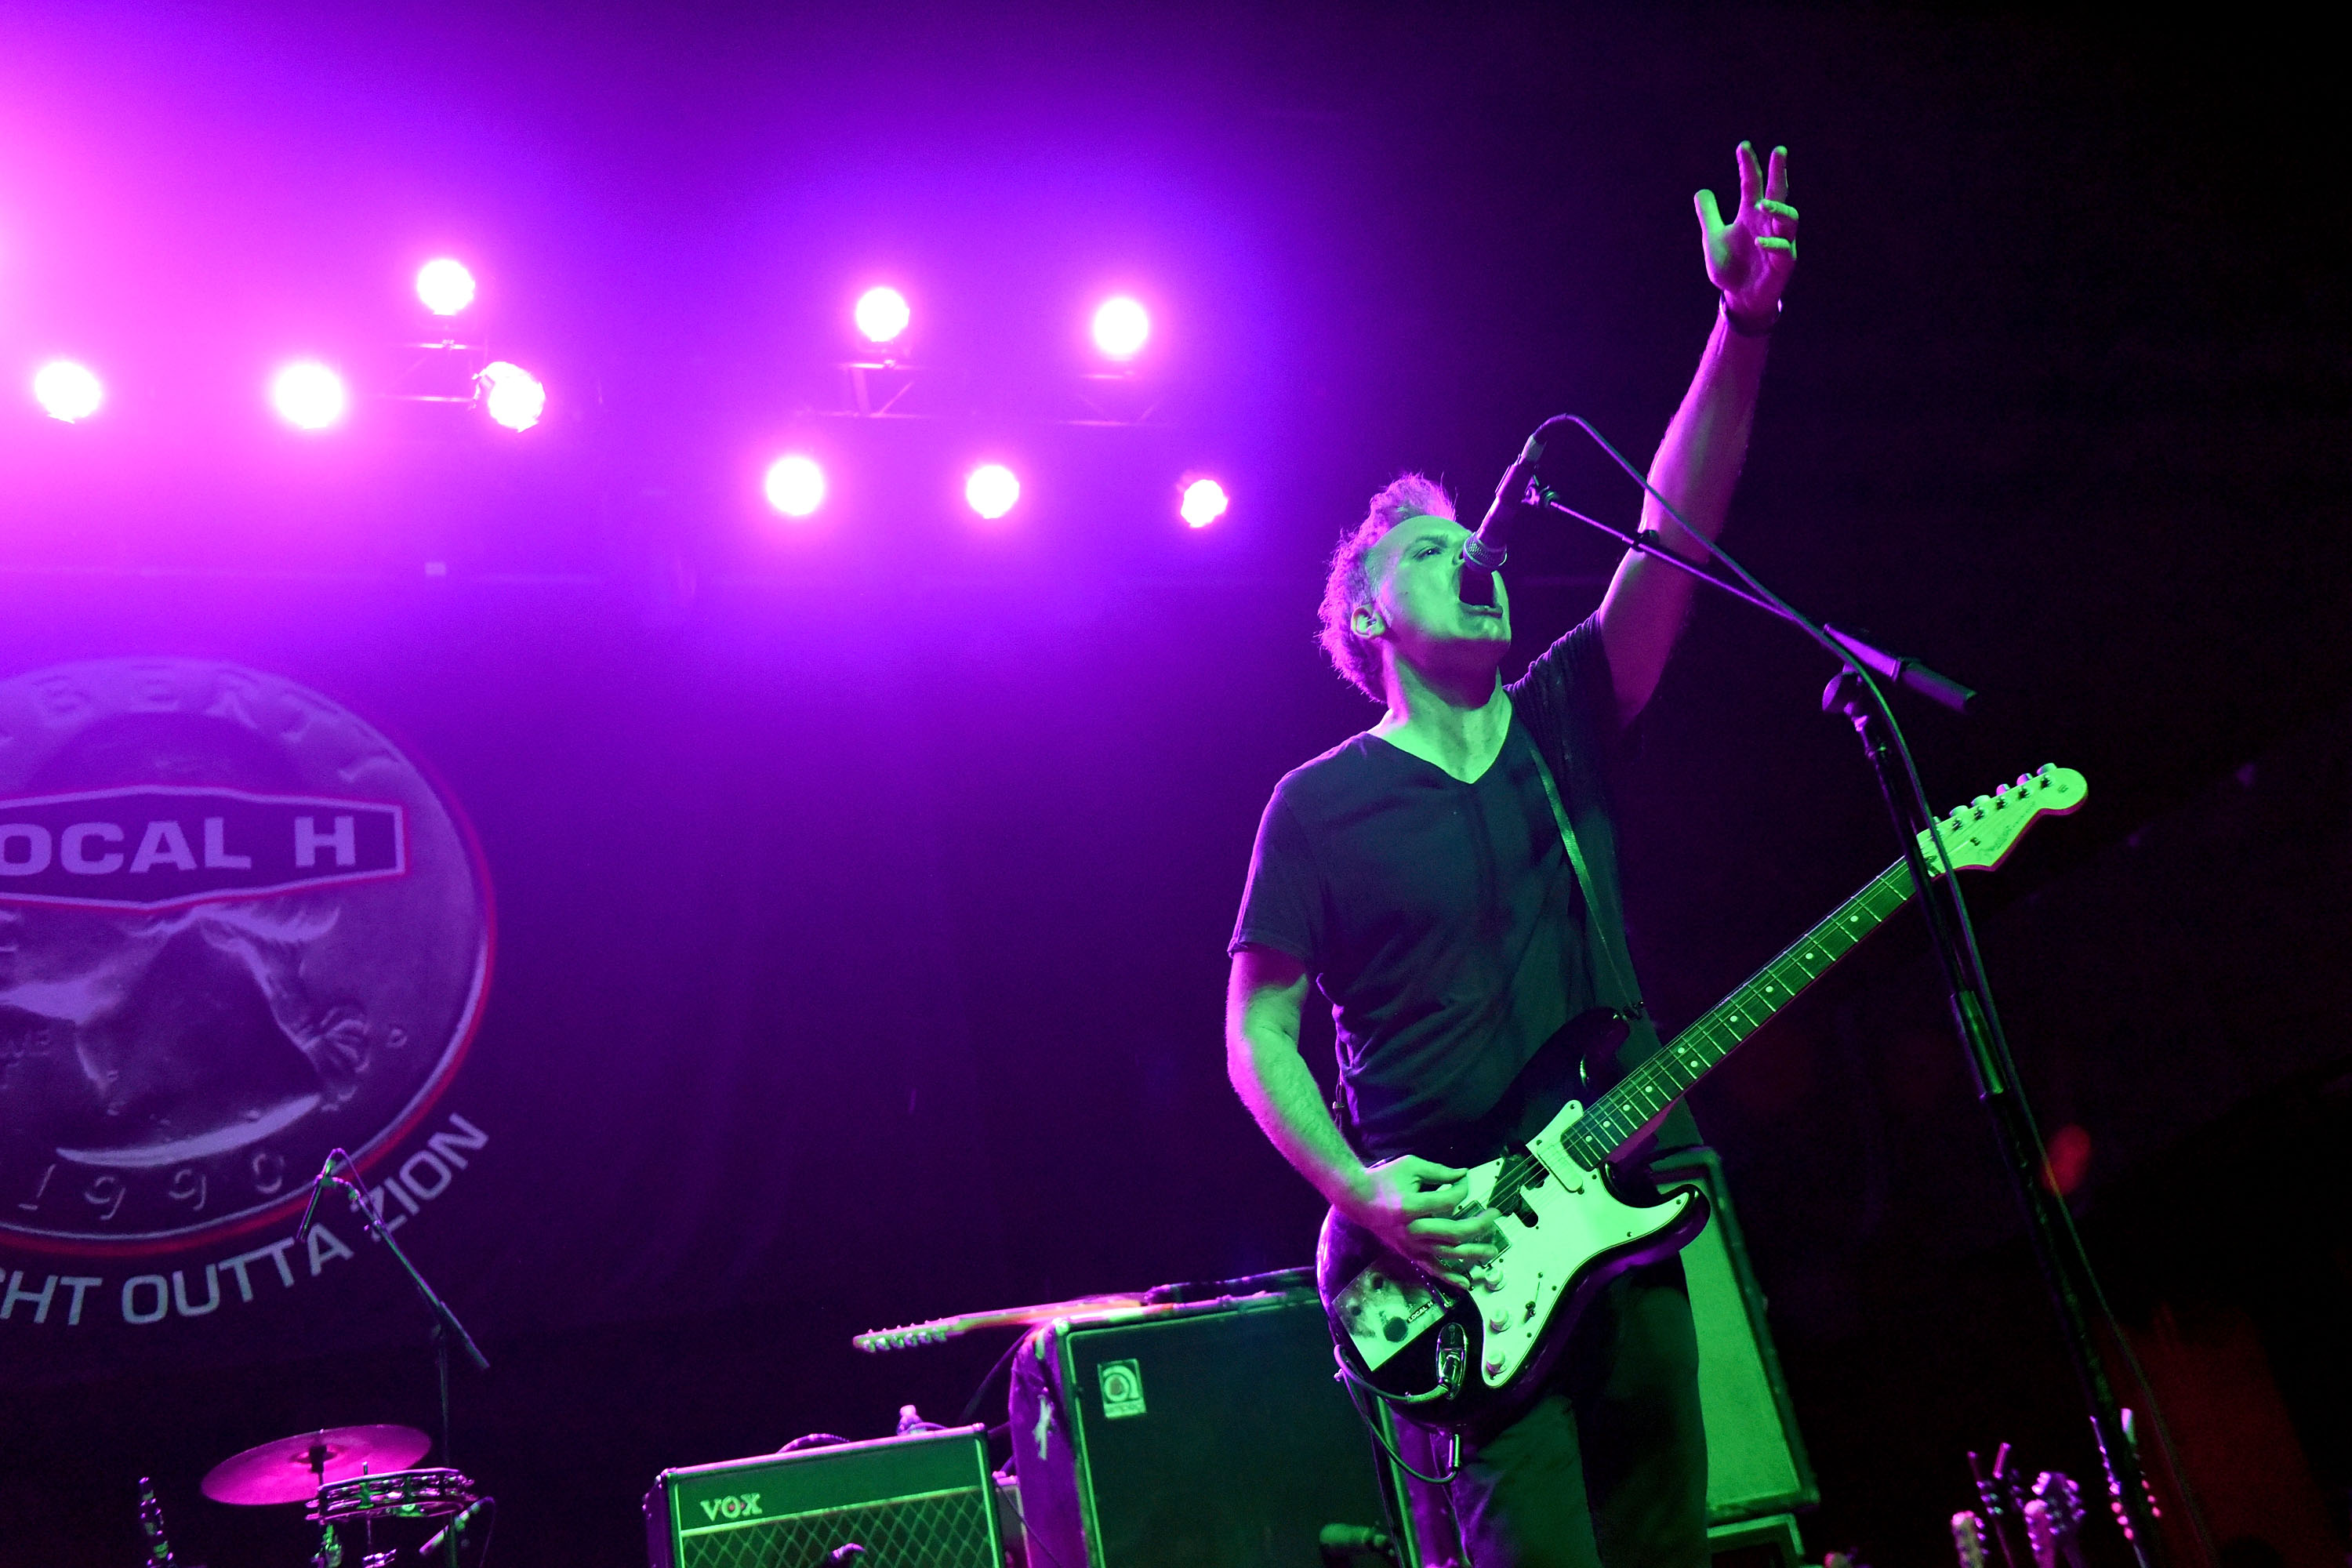 Local H's Scott Lucas on the Band's Longevity and Copacetic Career